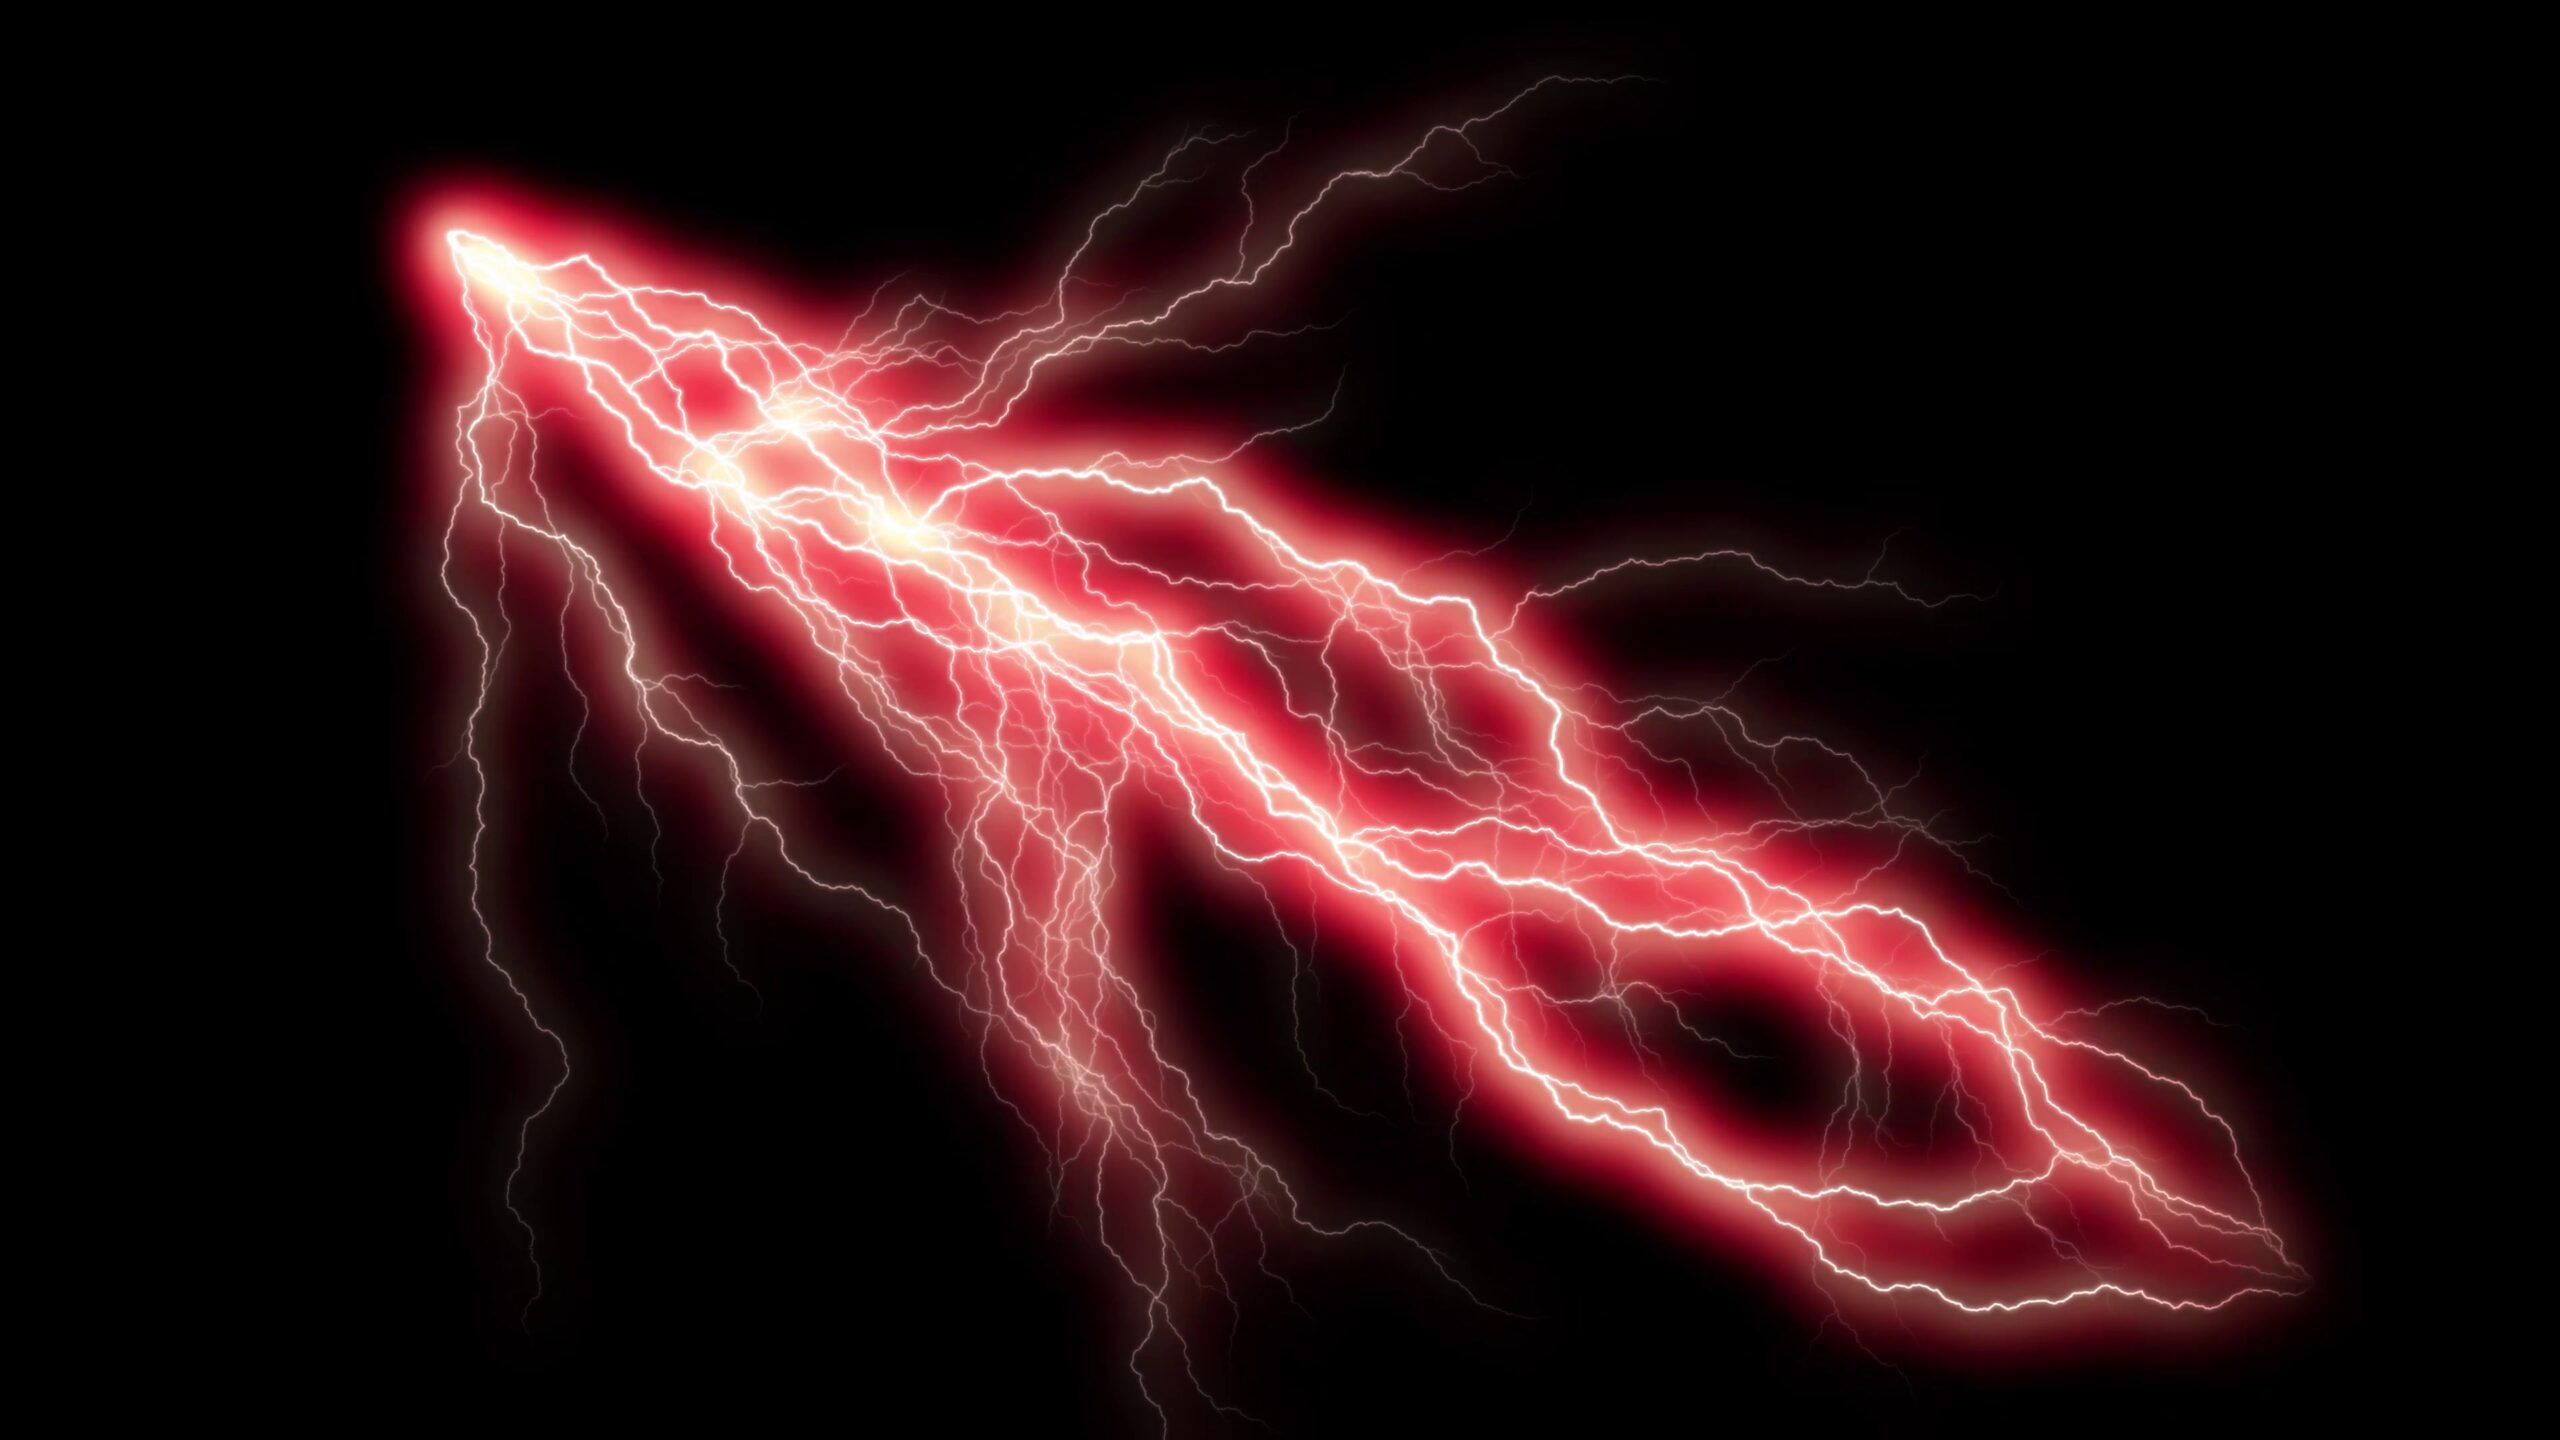 4K Red Lightning Overlay Effect Free Download || Overlay Effect For Editing